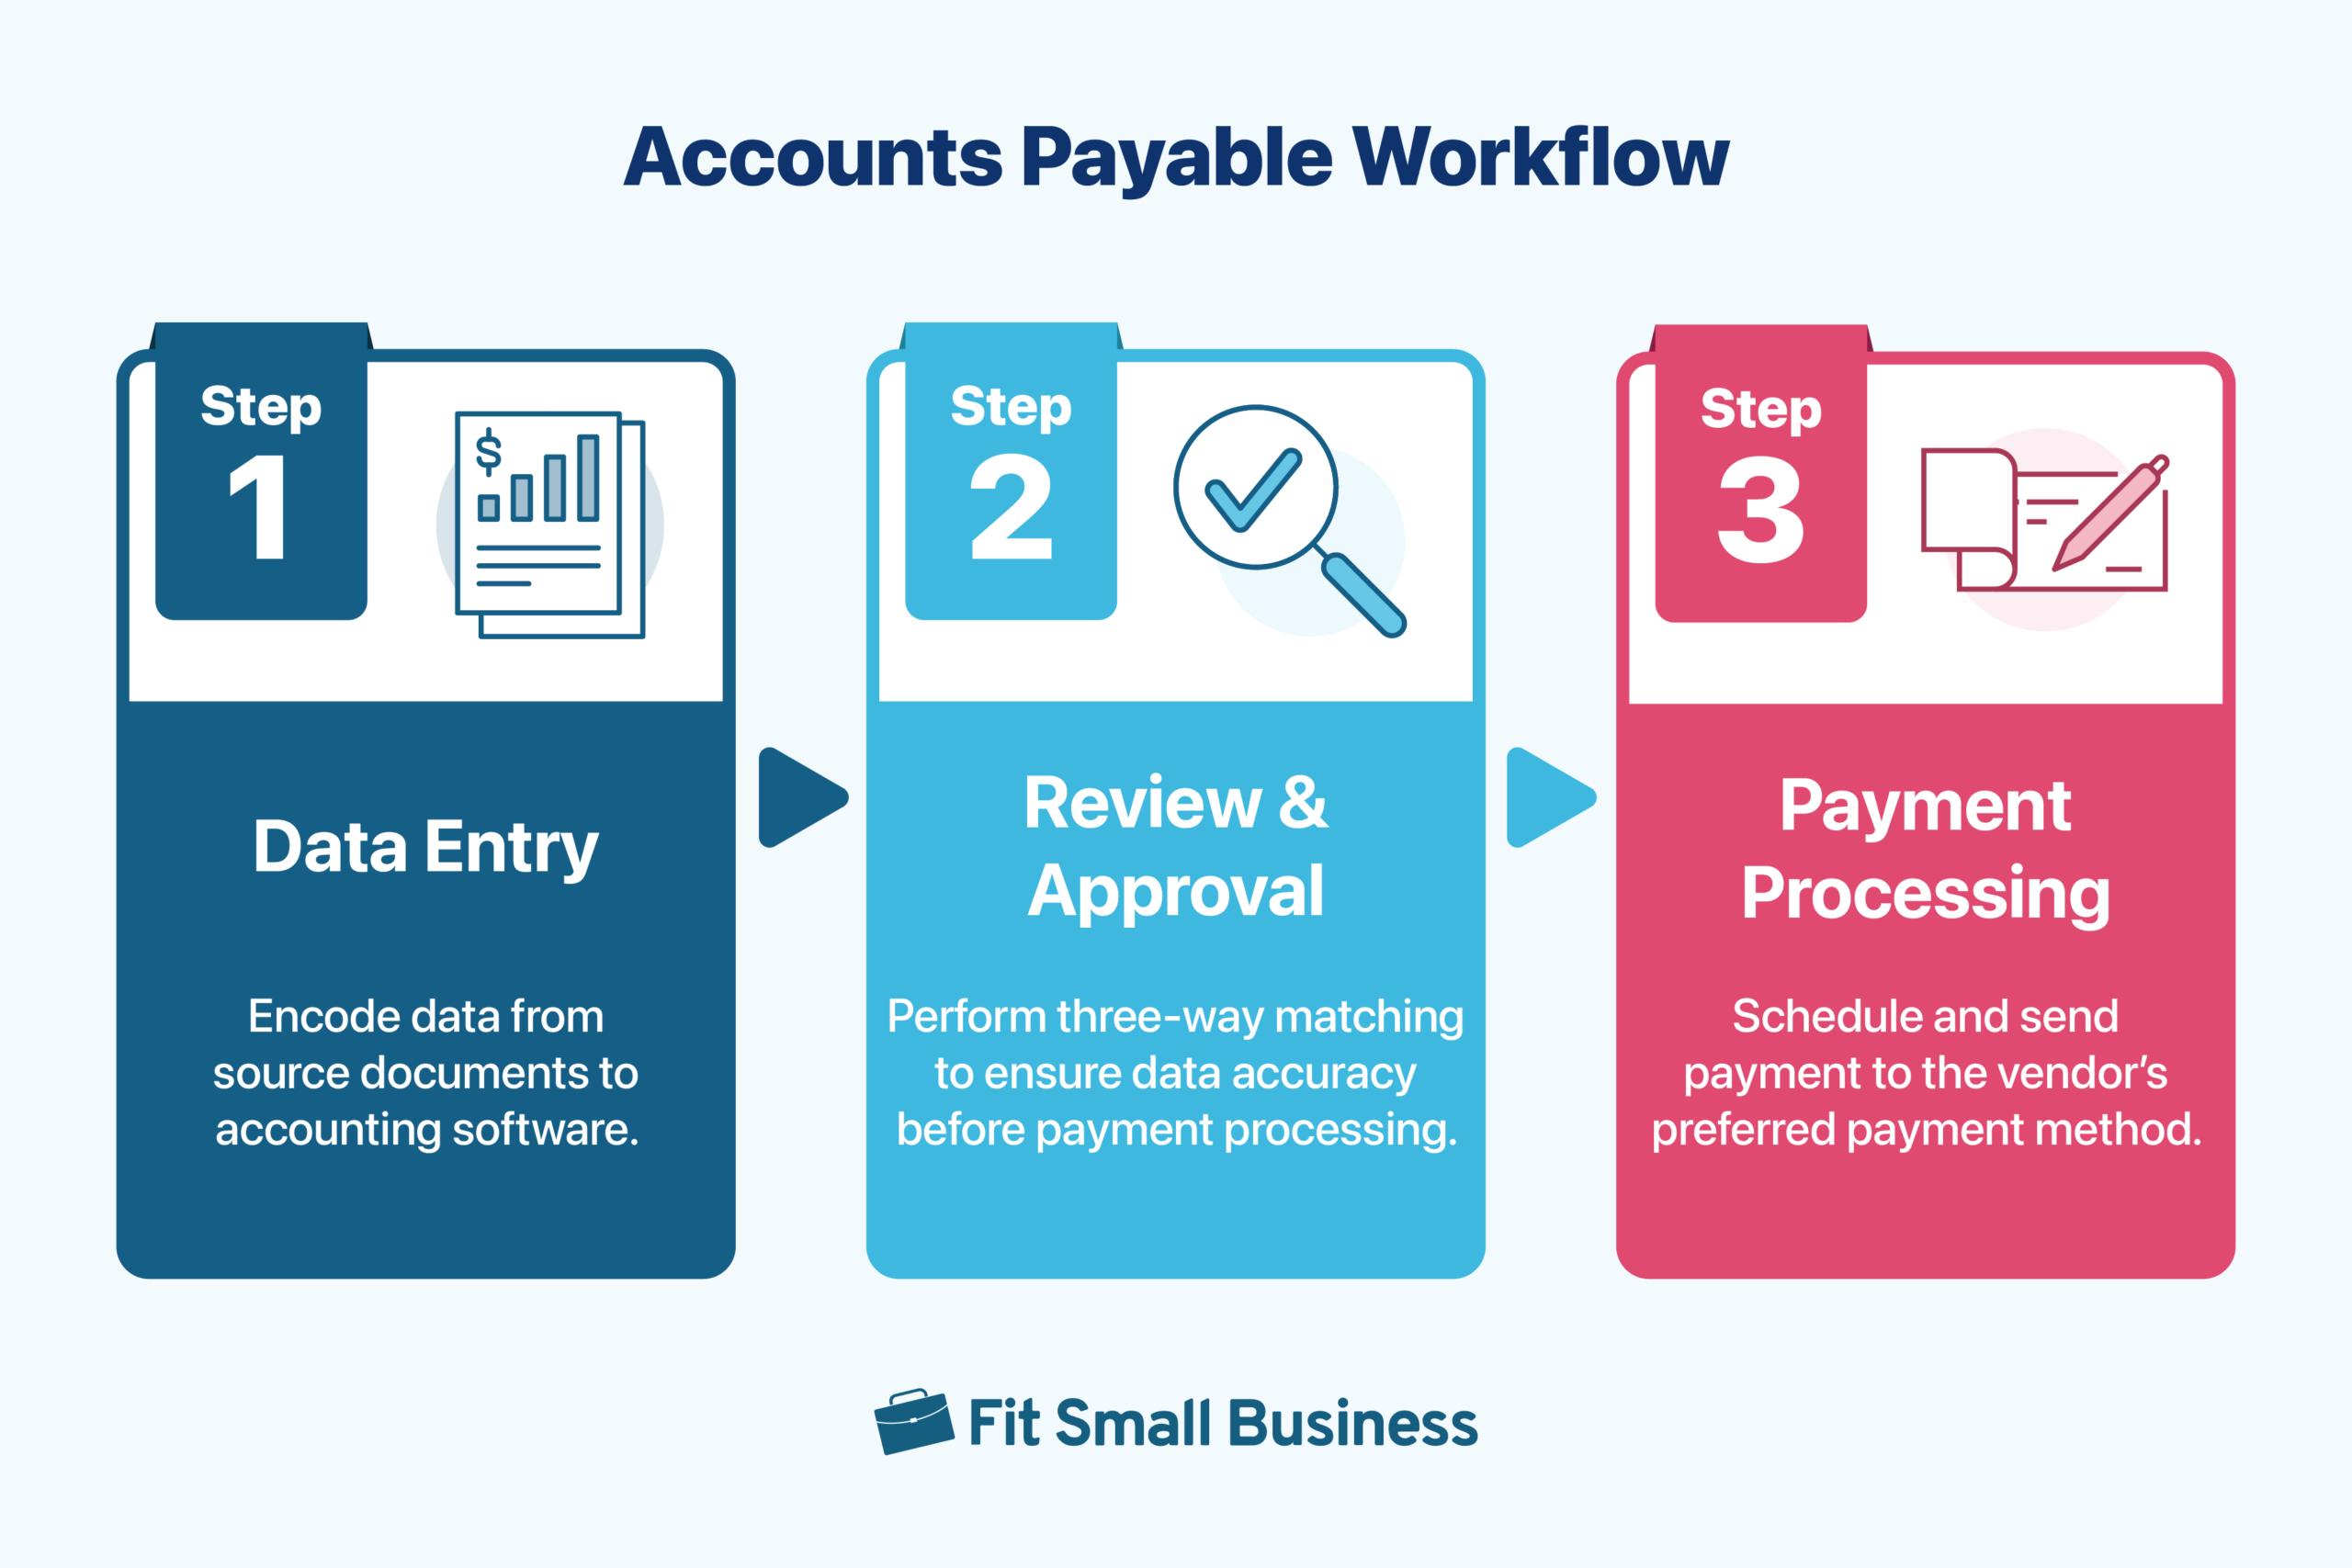 A graphic design illustrating Accounts Payable Workflow.